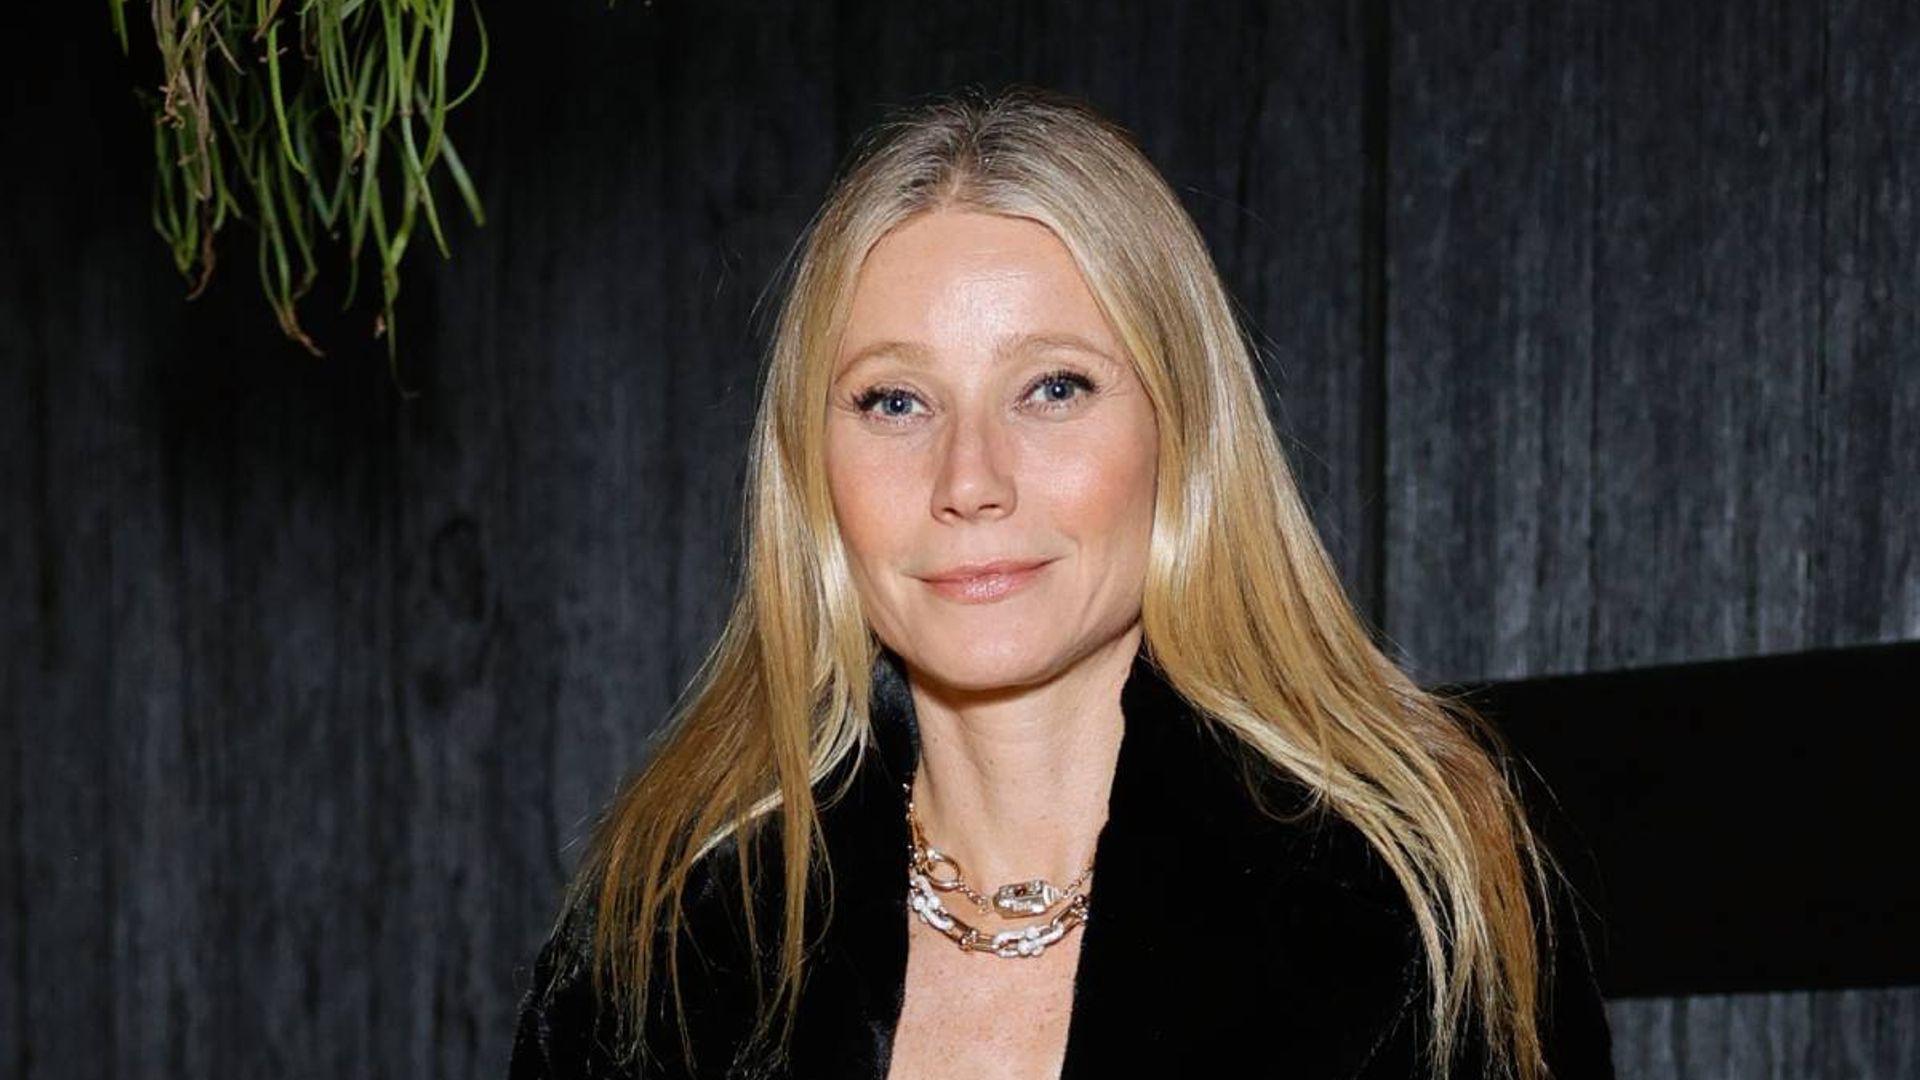 Gwyneth Paltrow Leaves Fans In Awe Of Her Physique As She Poses In Lingerie In Bathroom Video 